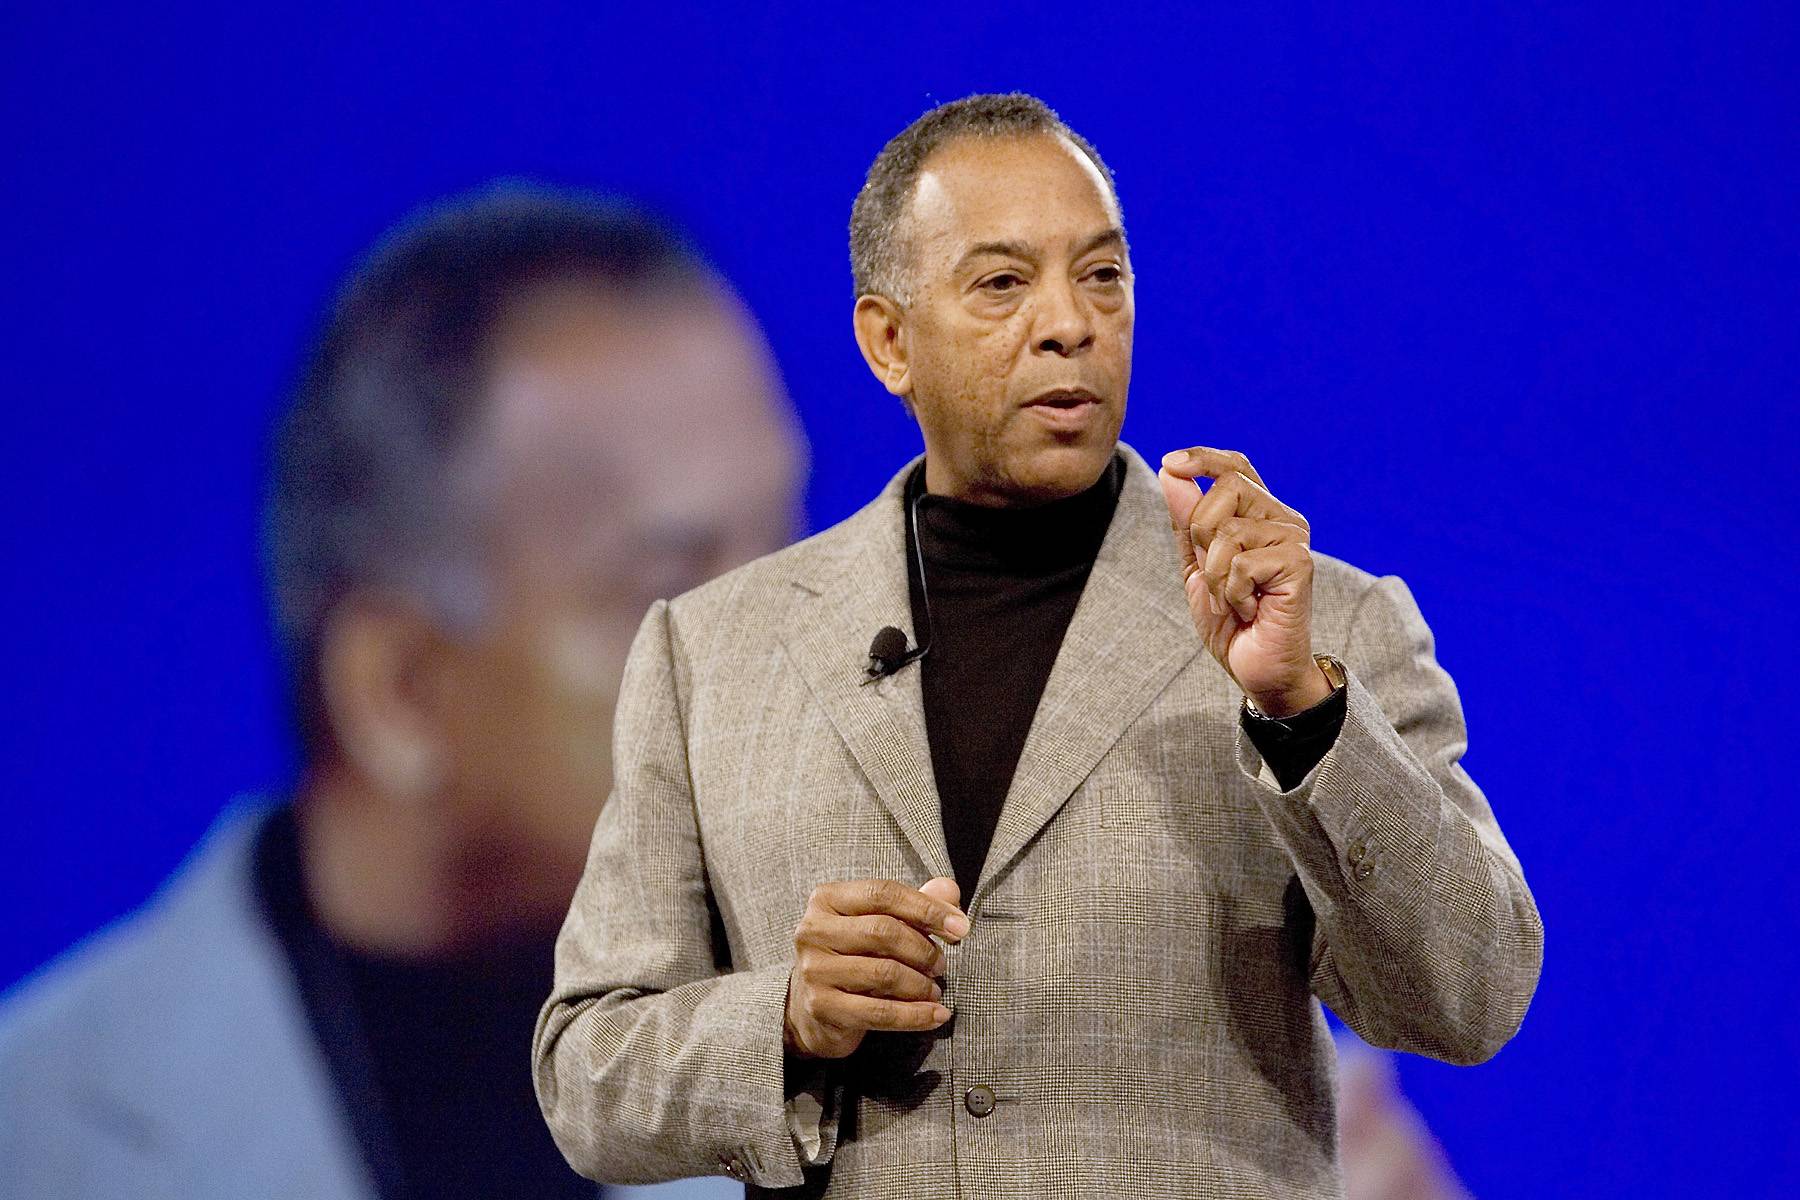 FAMU Alum Named Chairman of Microsoft - John W. Thompson, a 1971 graduate from Florida A&amp;M University, was appointed the independent chairman of computer software giant Microsoft Corp., replacing company founder Bill Gates. Thompson first joined the Microsoft board in 2012 a year after he was inducted into the FAMU SBI Hall of Fame.&nbsp;&nbsp; (Photo: David Paul Morris/Getty Images)